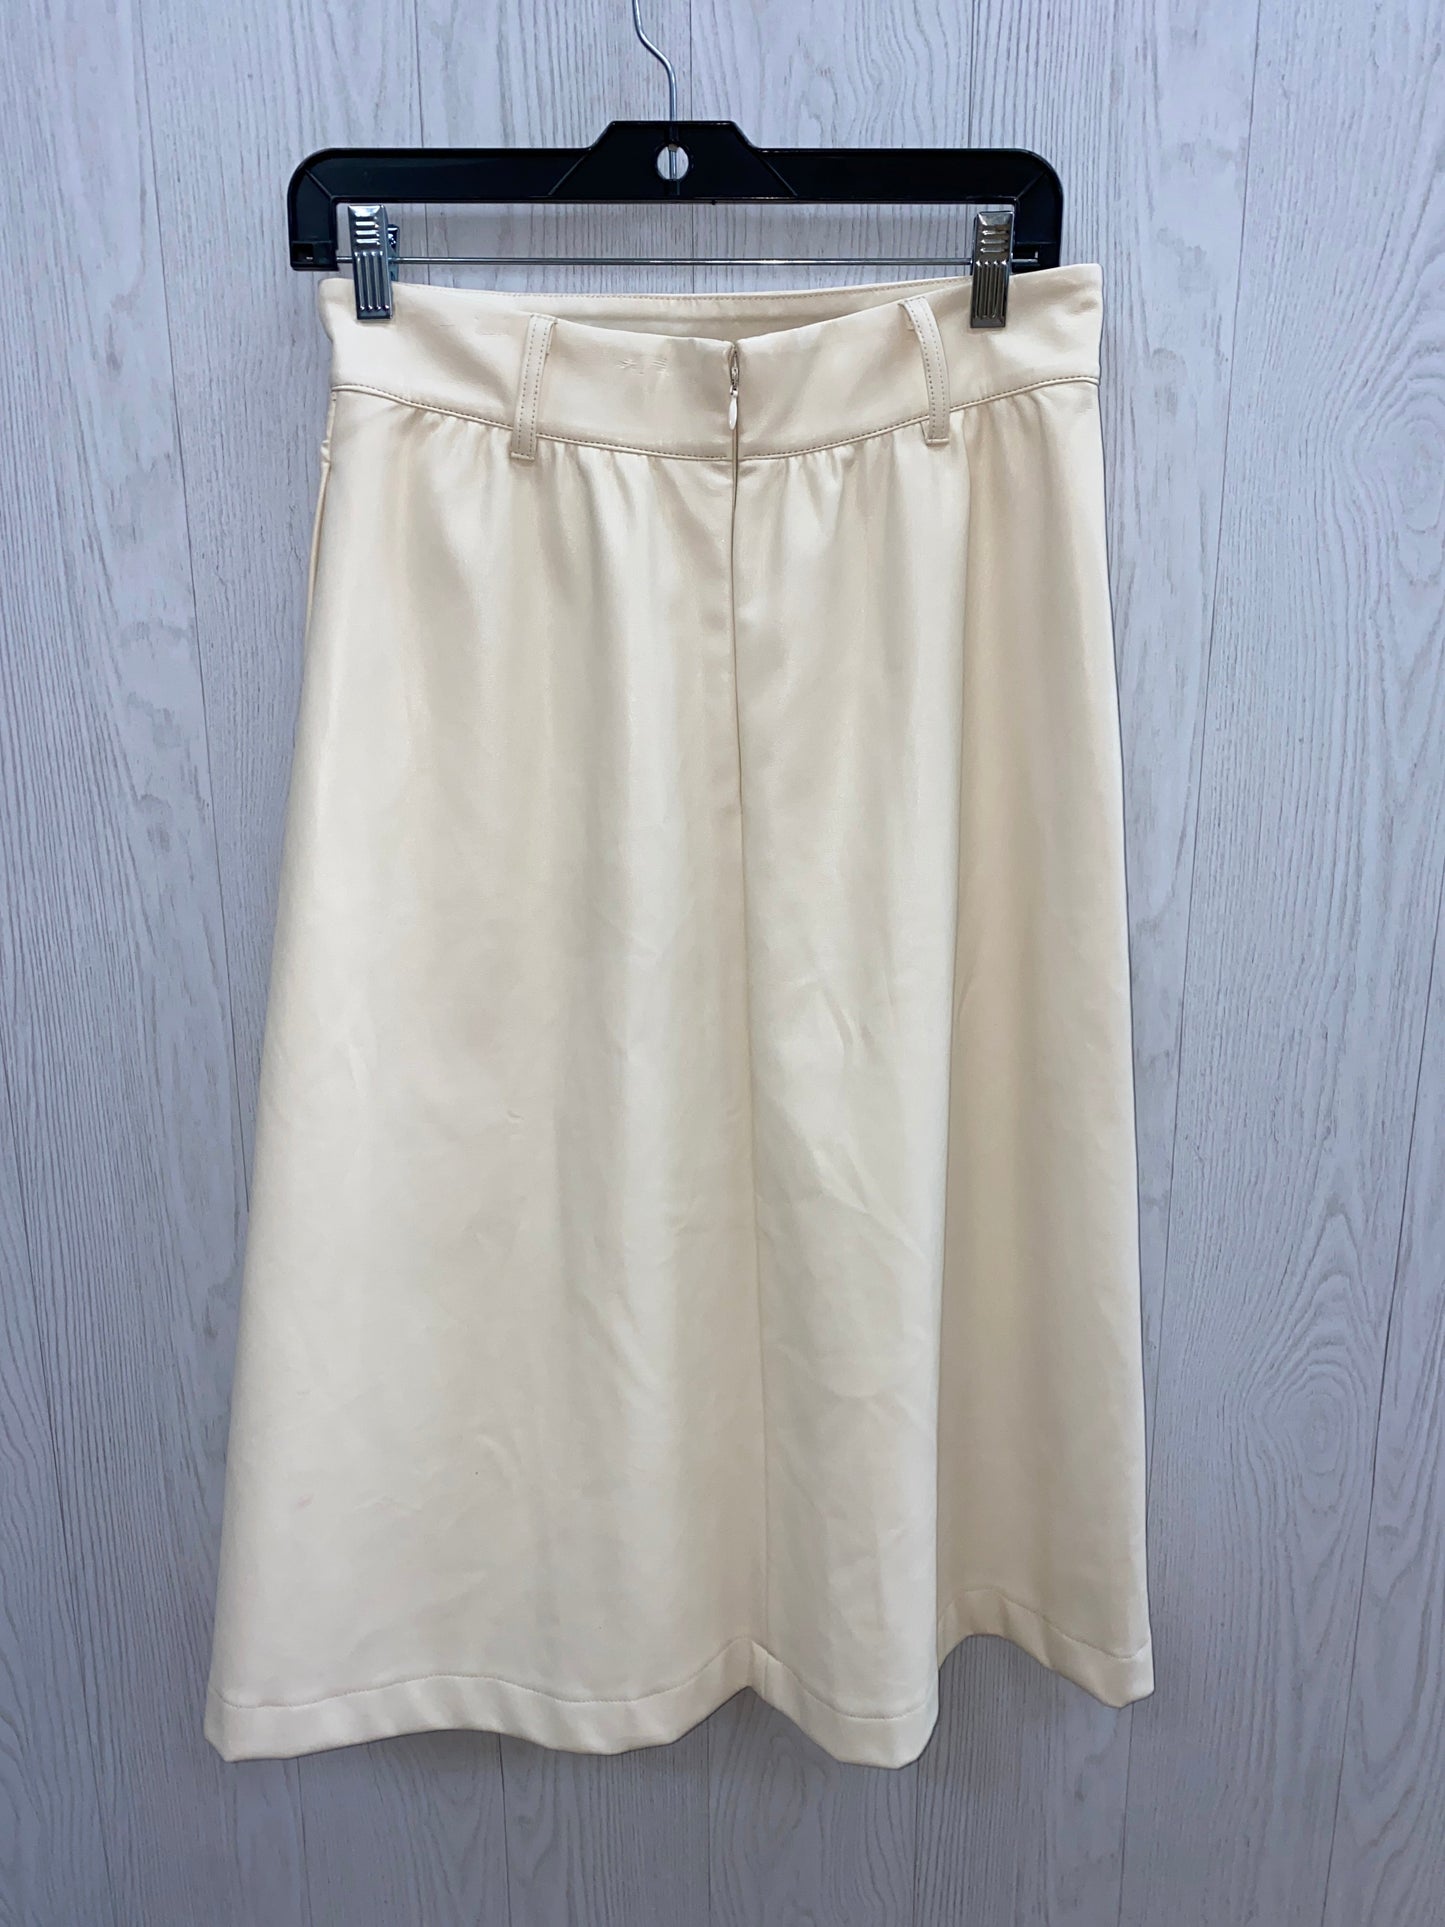 Skirt Midi By Who What Wear  Size: S